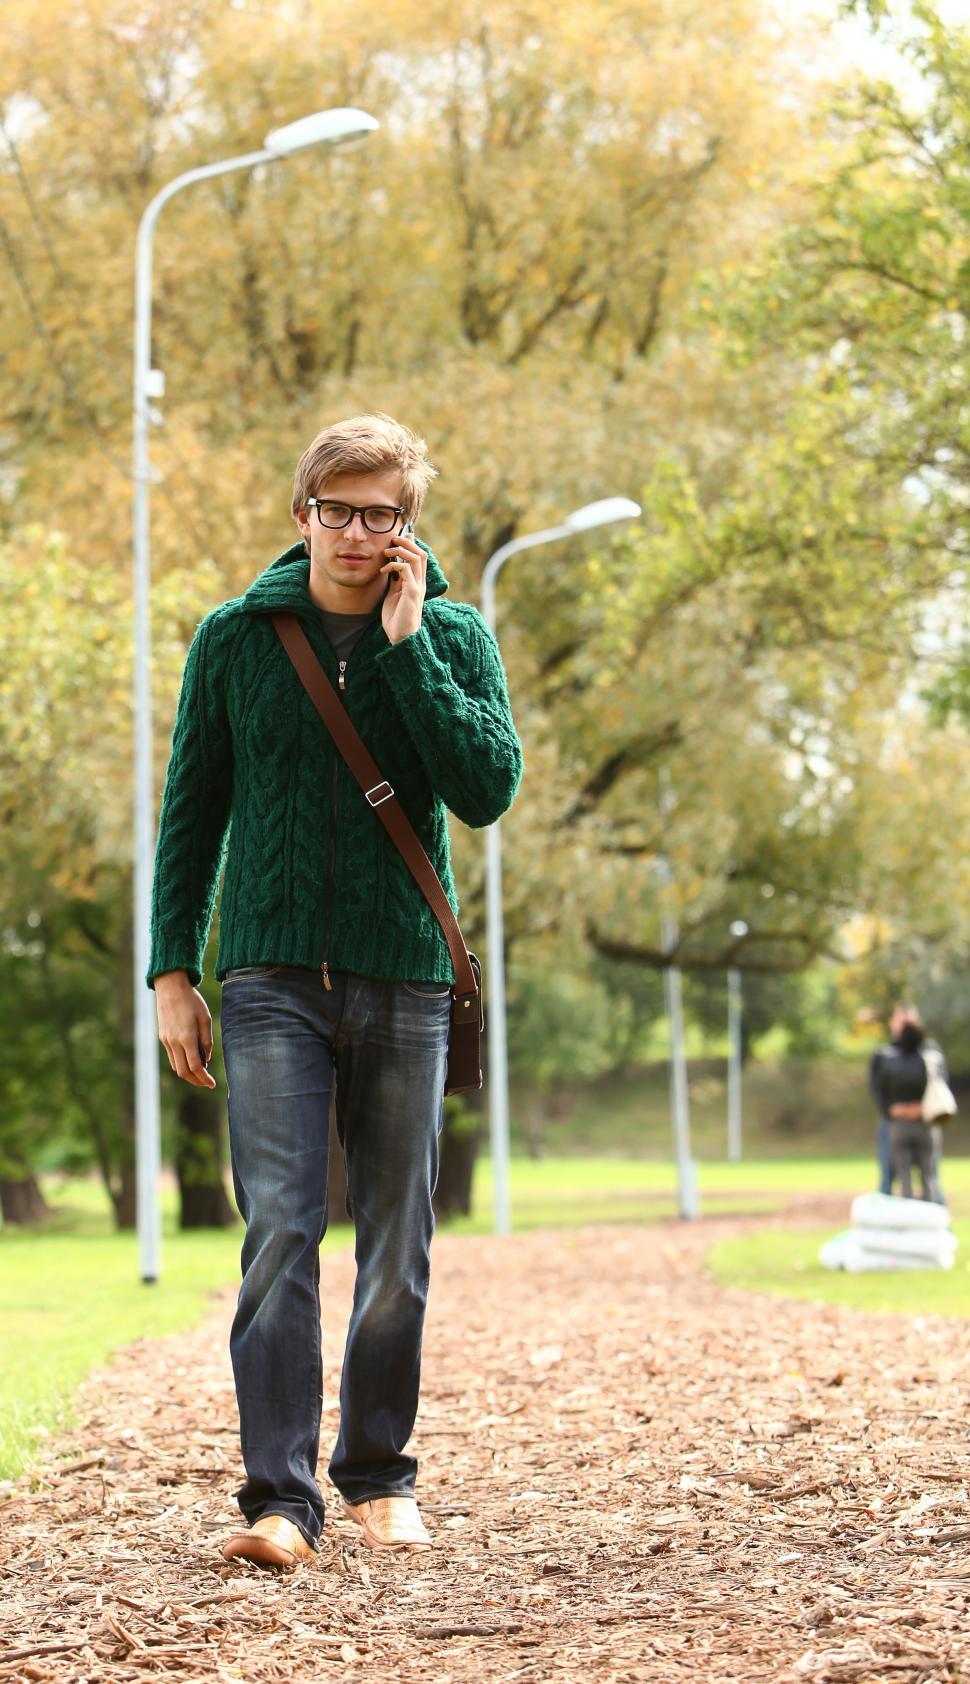 Free Image of Man in the park on the phone 